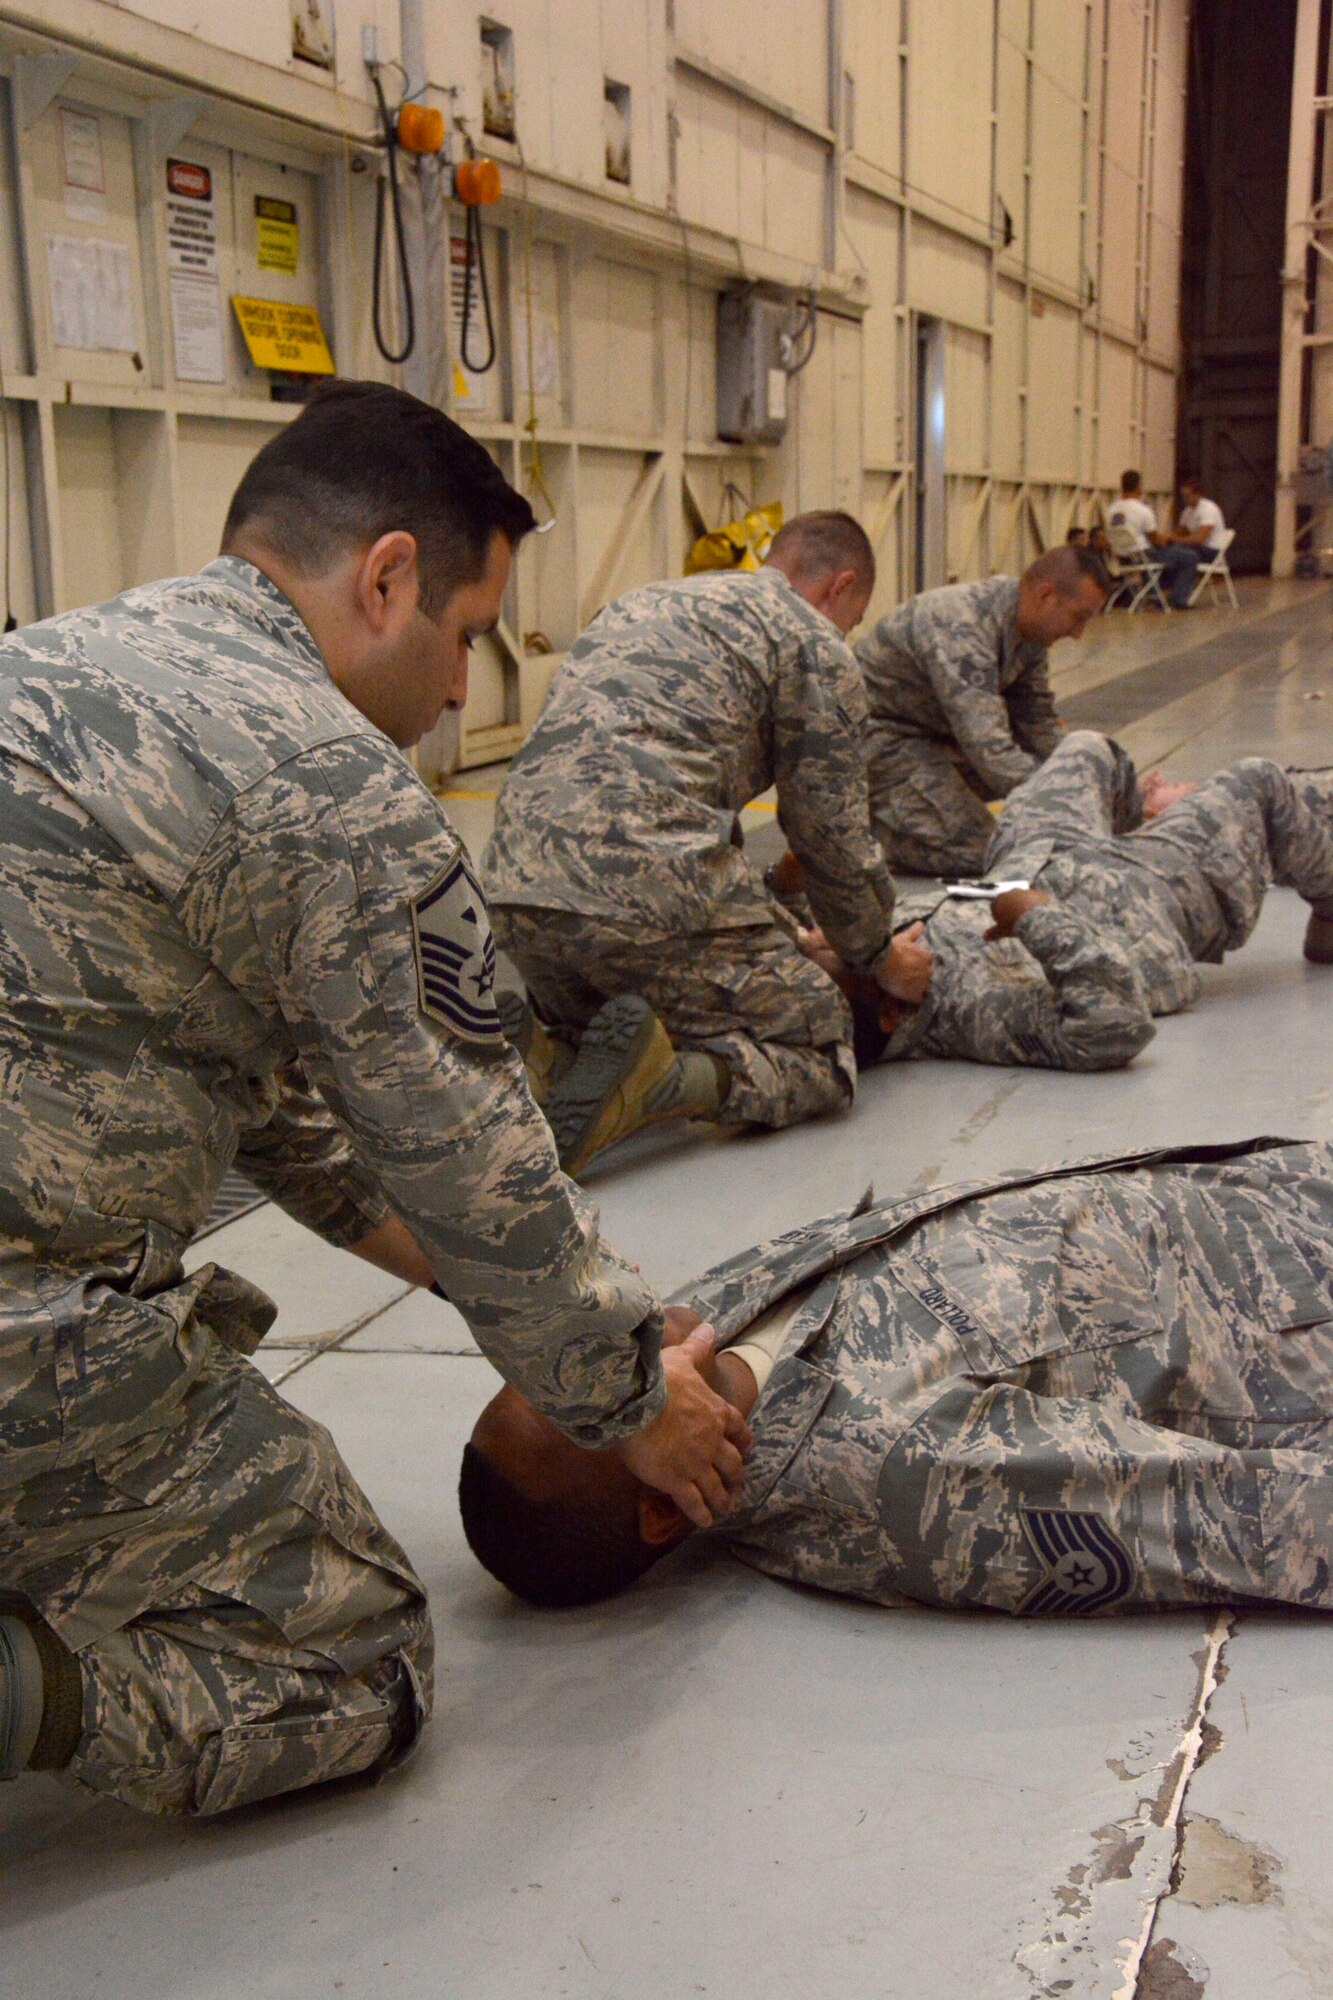 Members of the North Carolina Air National Guard, work together at one of eight stations set up for training during the Air Expeditionary Skills Rodeo, held Sept. 13, 2015, in a hangar at the North Carolina Air National Guard Base, Charlotte Douglas International Airport. These Airmen learned basic self-aid and buddy care tactics such as detection of breathing and treatment for shock during the training. (U.S. Air National Guard photo by Senior Airman Laura Montgomery, 145th Public Affairs/Released)